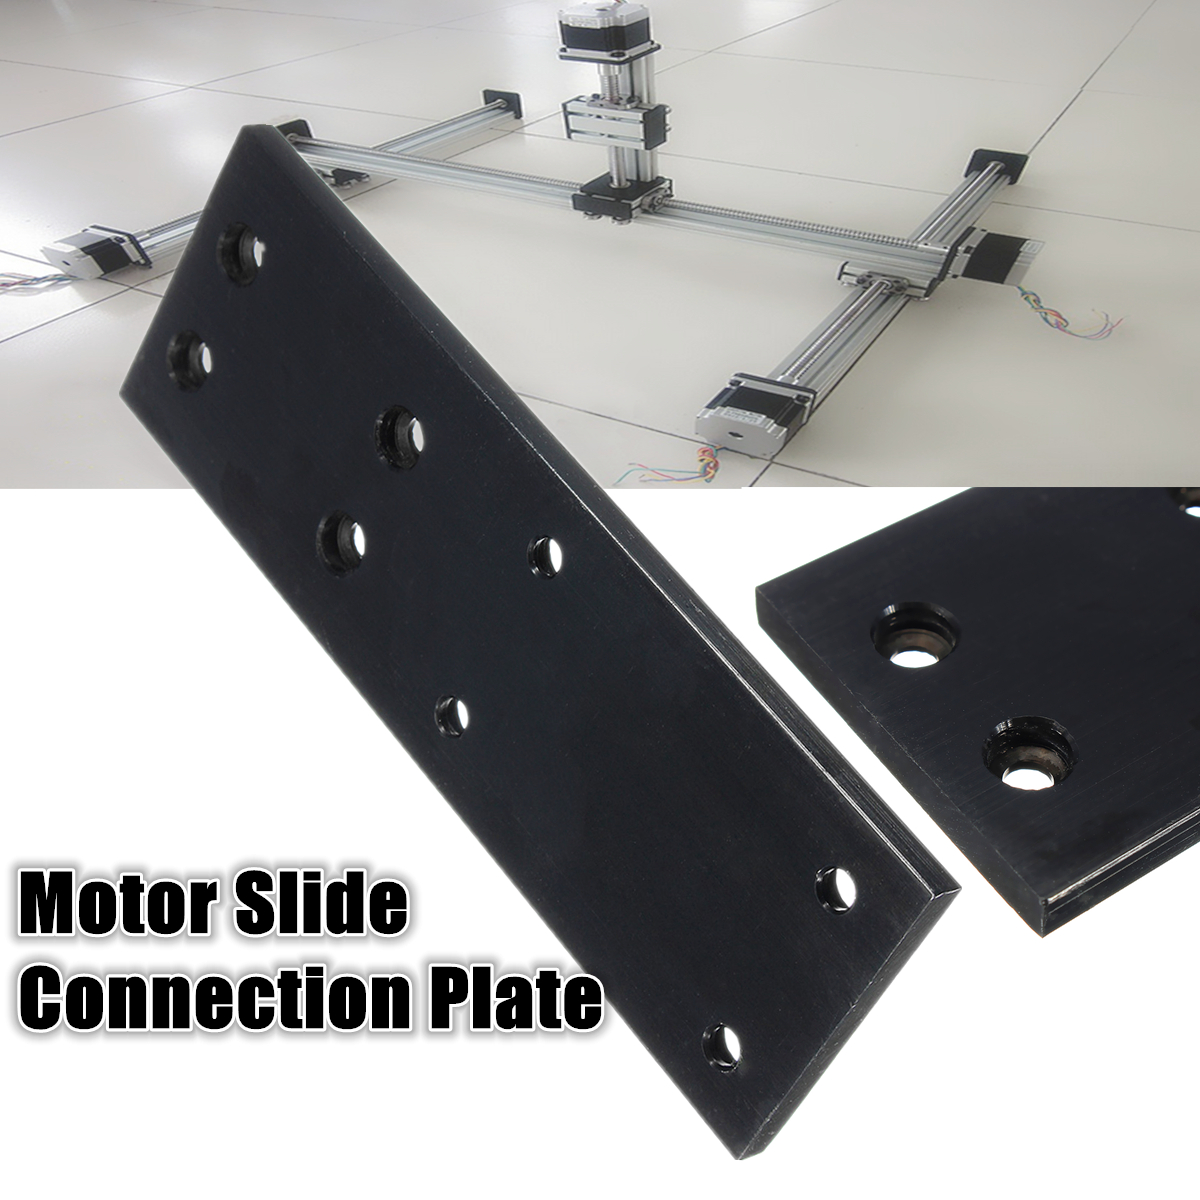 150506mm-Motor-Slide-Connection-Plate-Electric-Linear-Sliding-Table-XY-Axis-Pinboard-Board-1297972-9